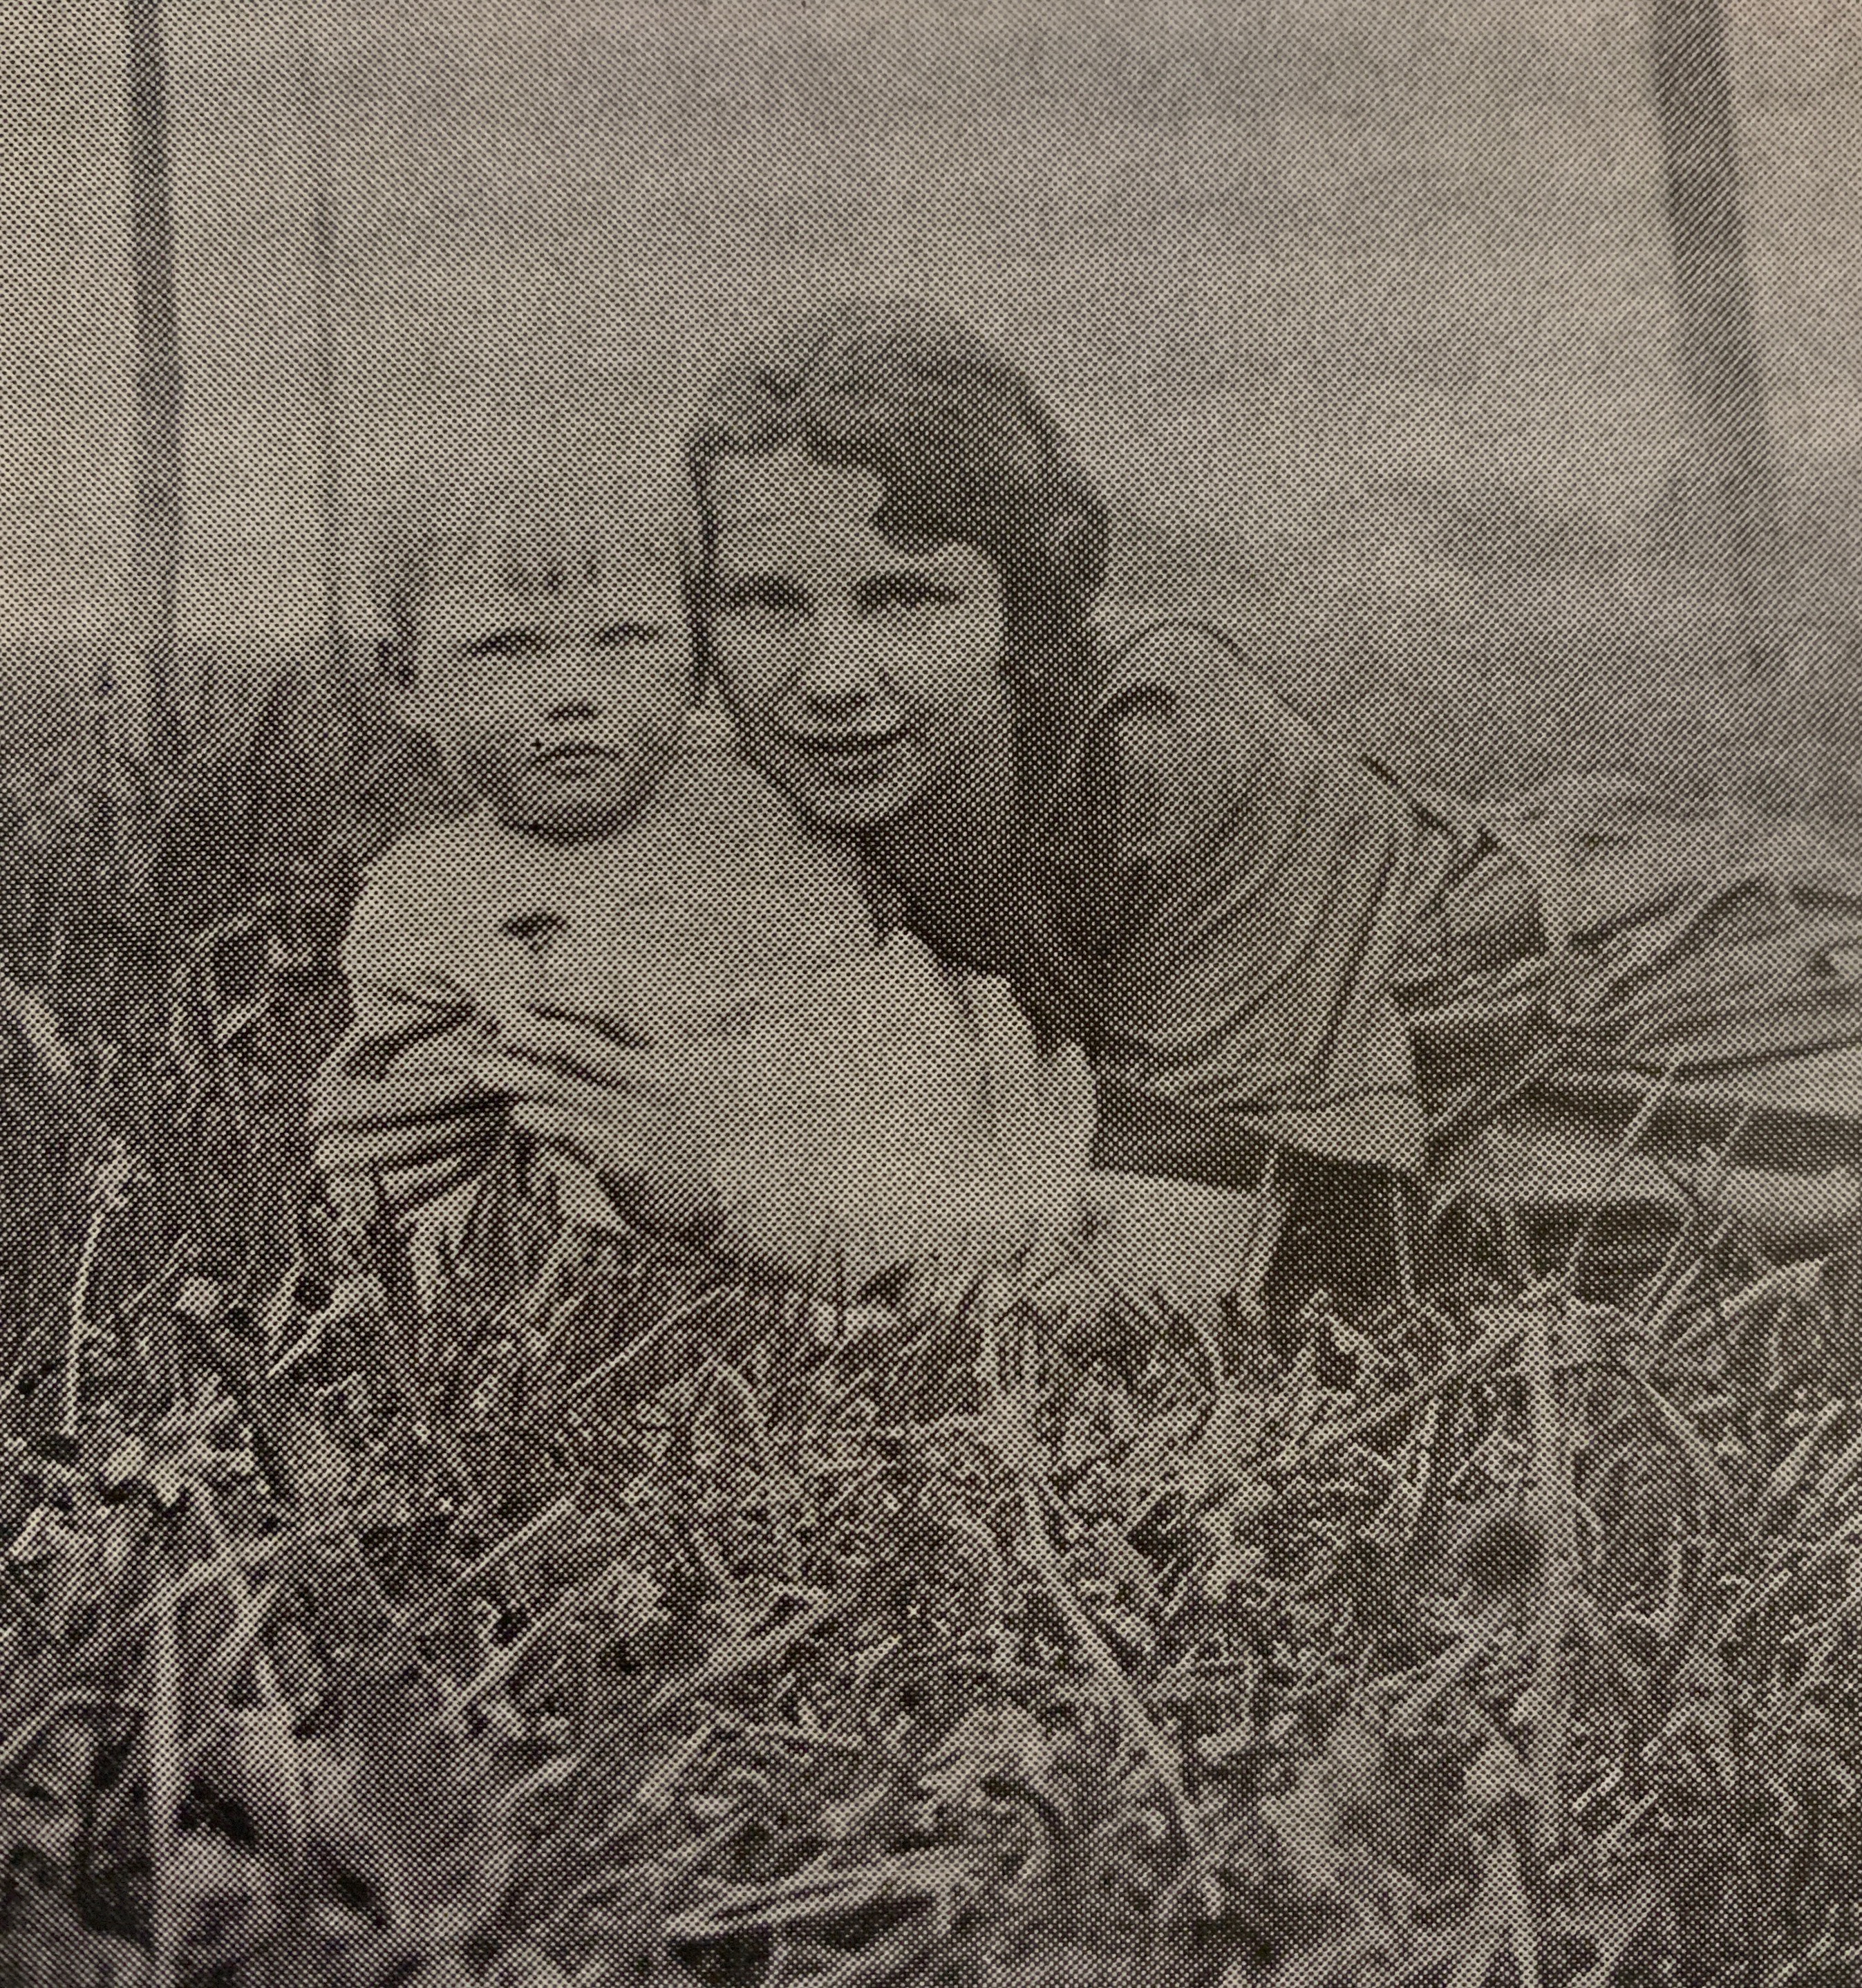 Evelyn Haukom, age 15, with her cousin Dorothy Ann Giere (born September 1920).